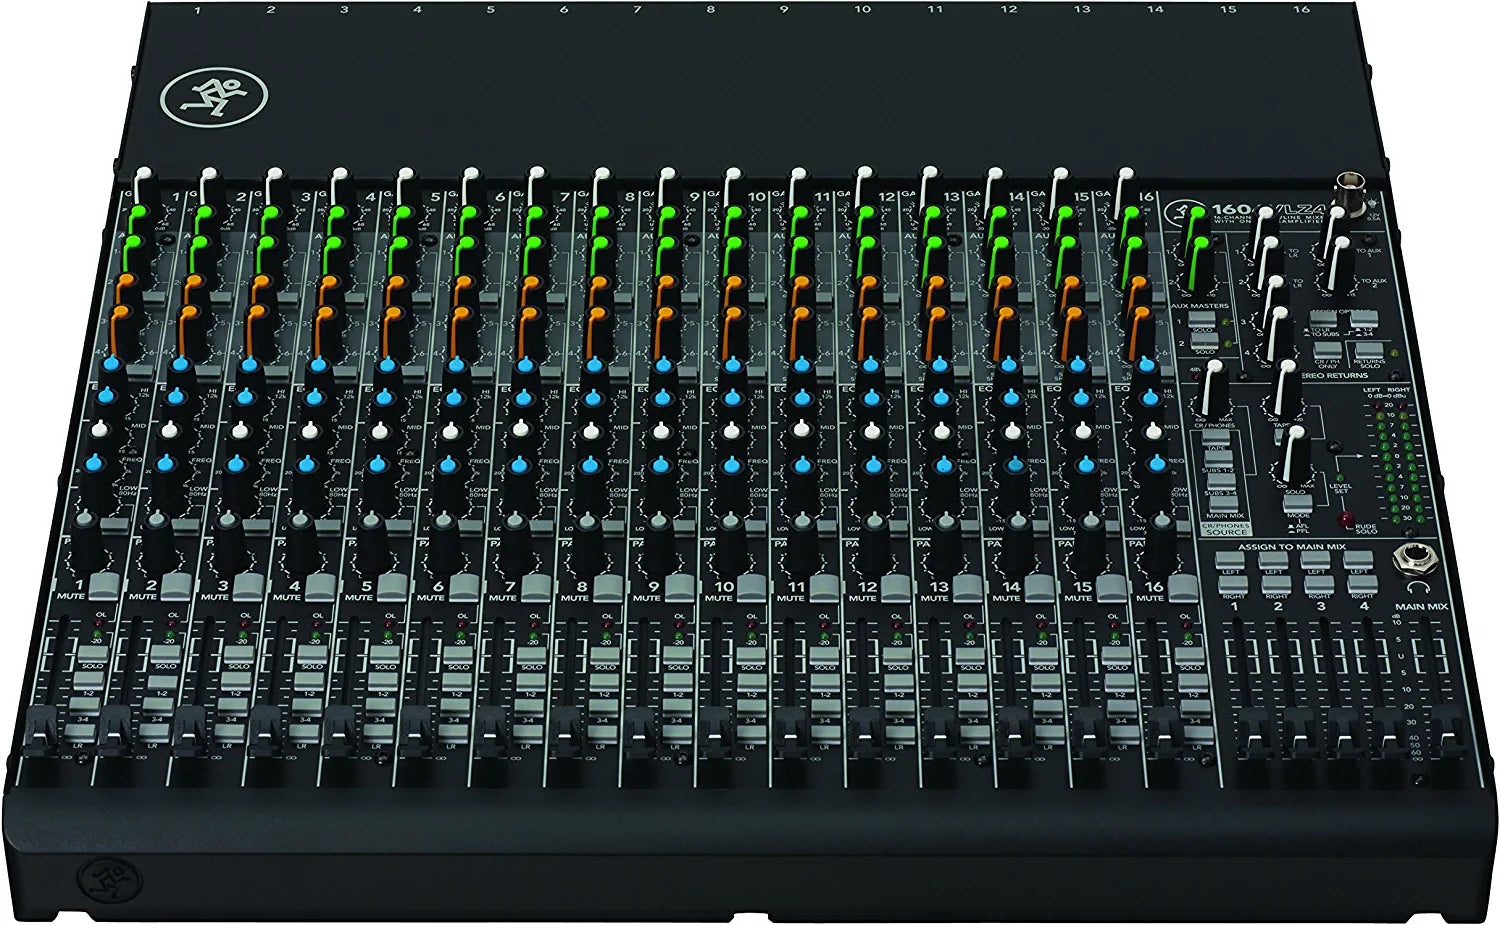 Mackie 1604VLZ4 16-channel Mixer 4-Bus Compact Mixer with Ultra-wide 60dB gain range and 16 Onyx Mic Preamps